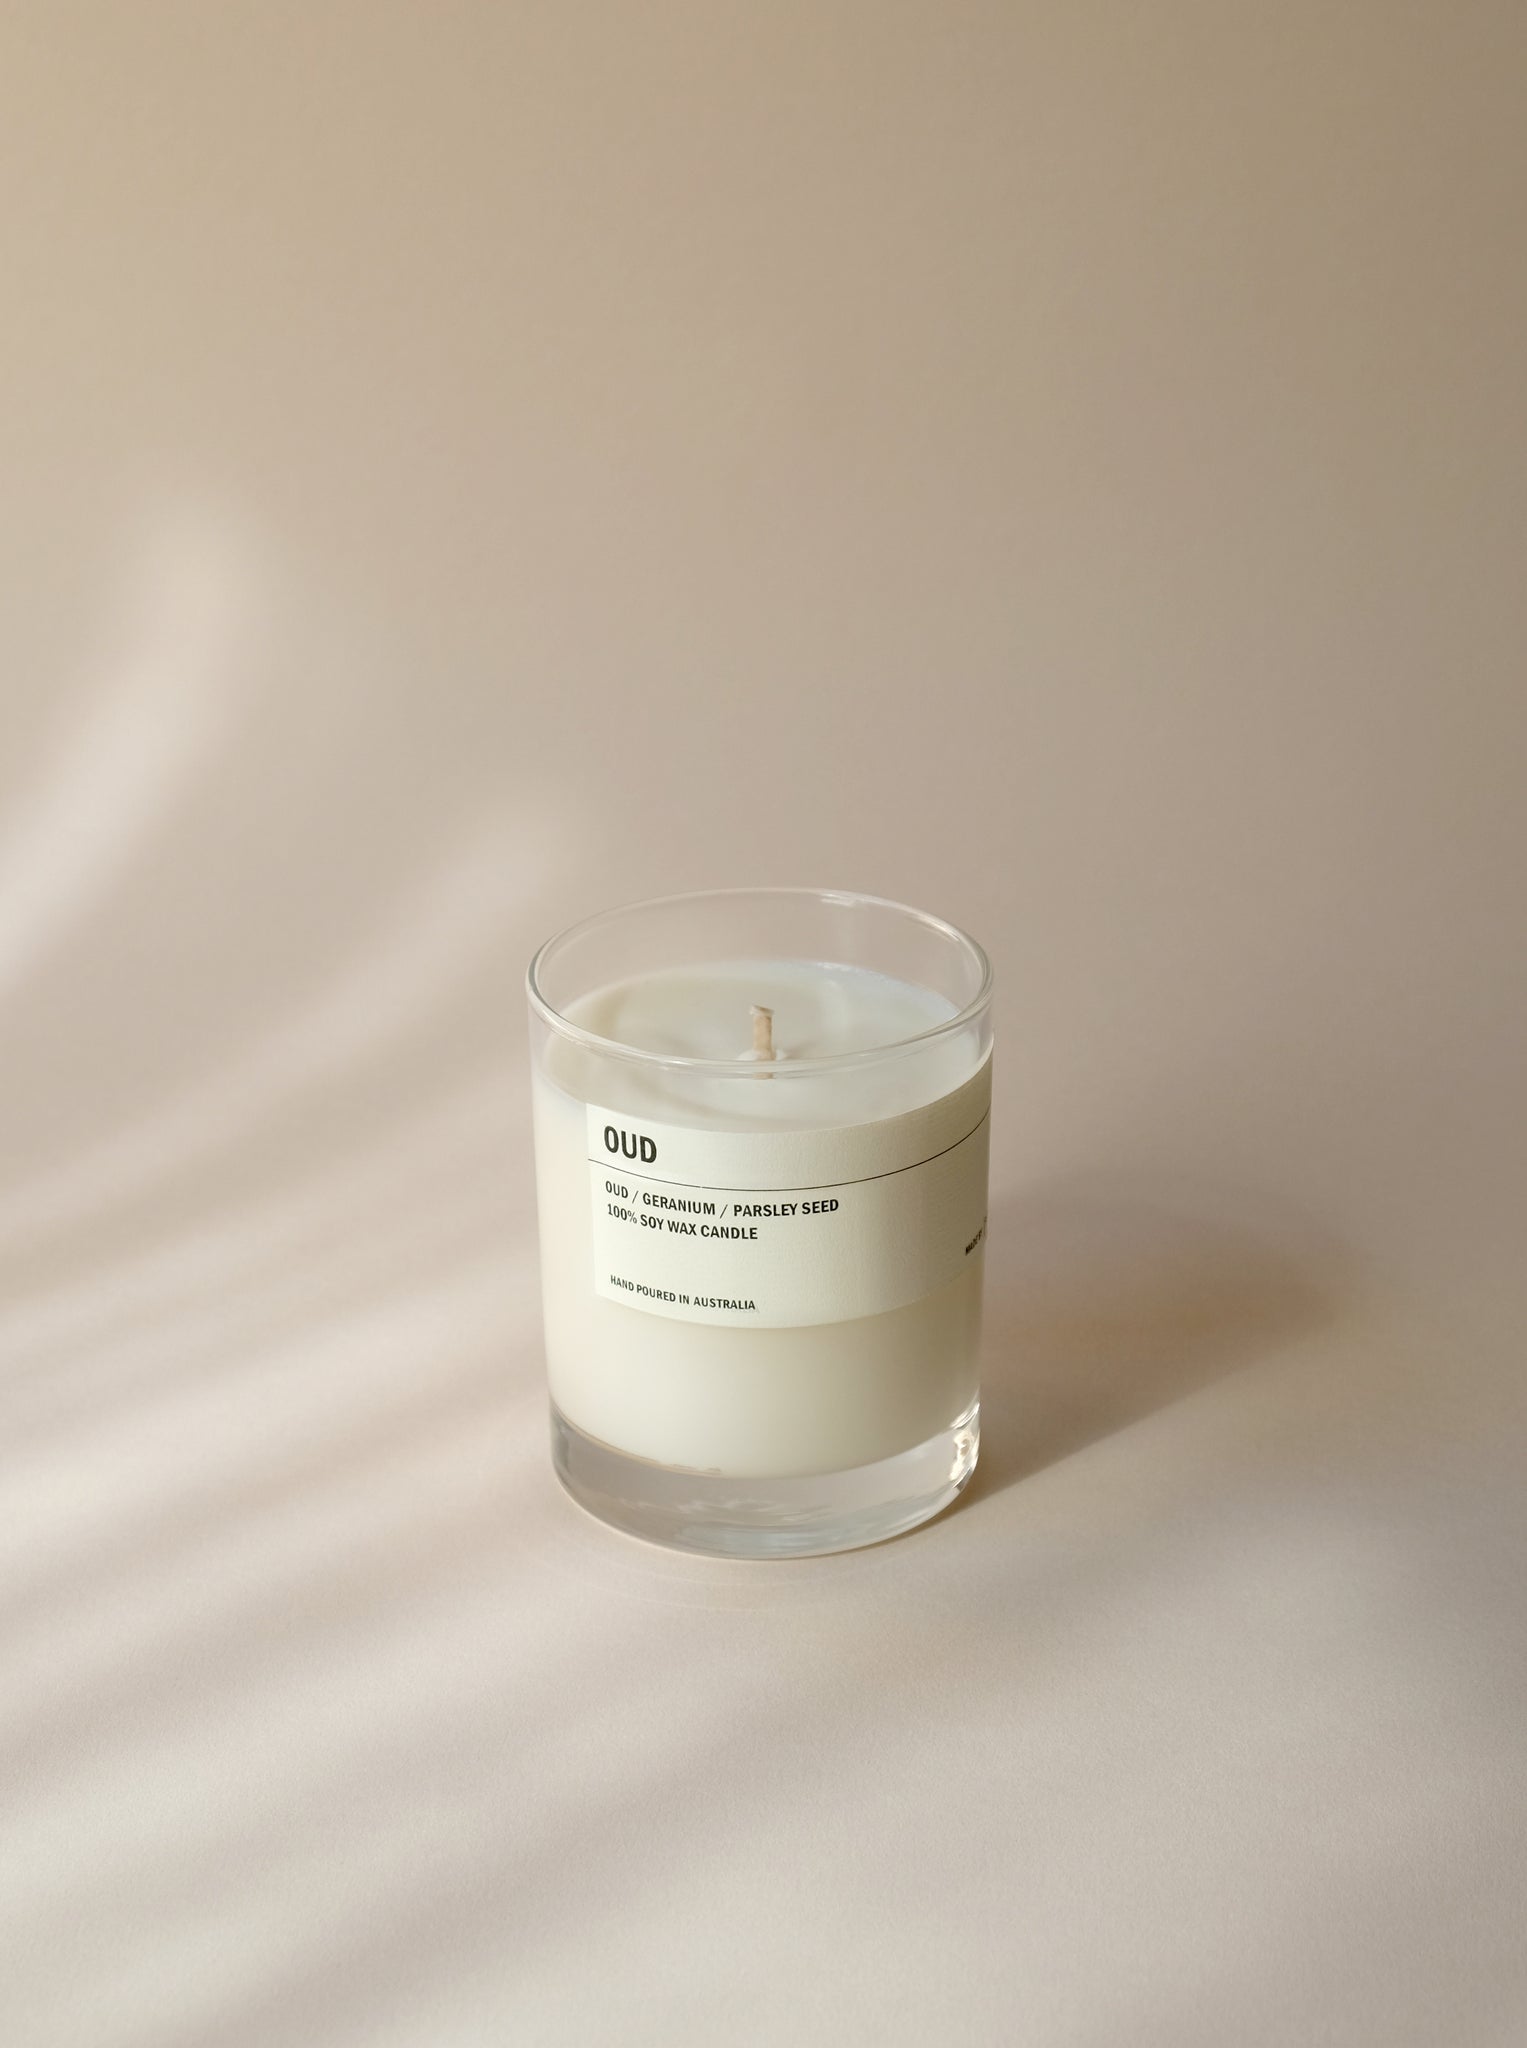 OUD: Oud Wood / Geranium / Parsley Seed Clear Candle 300g